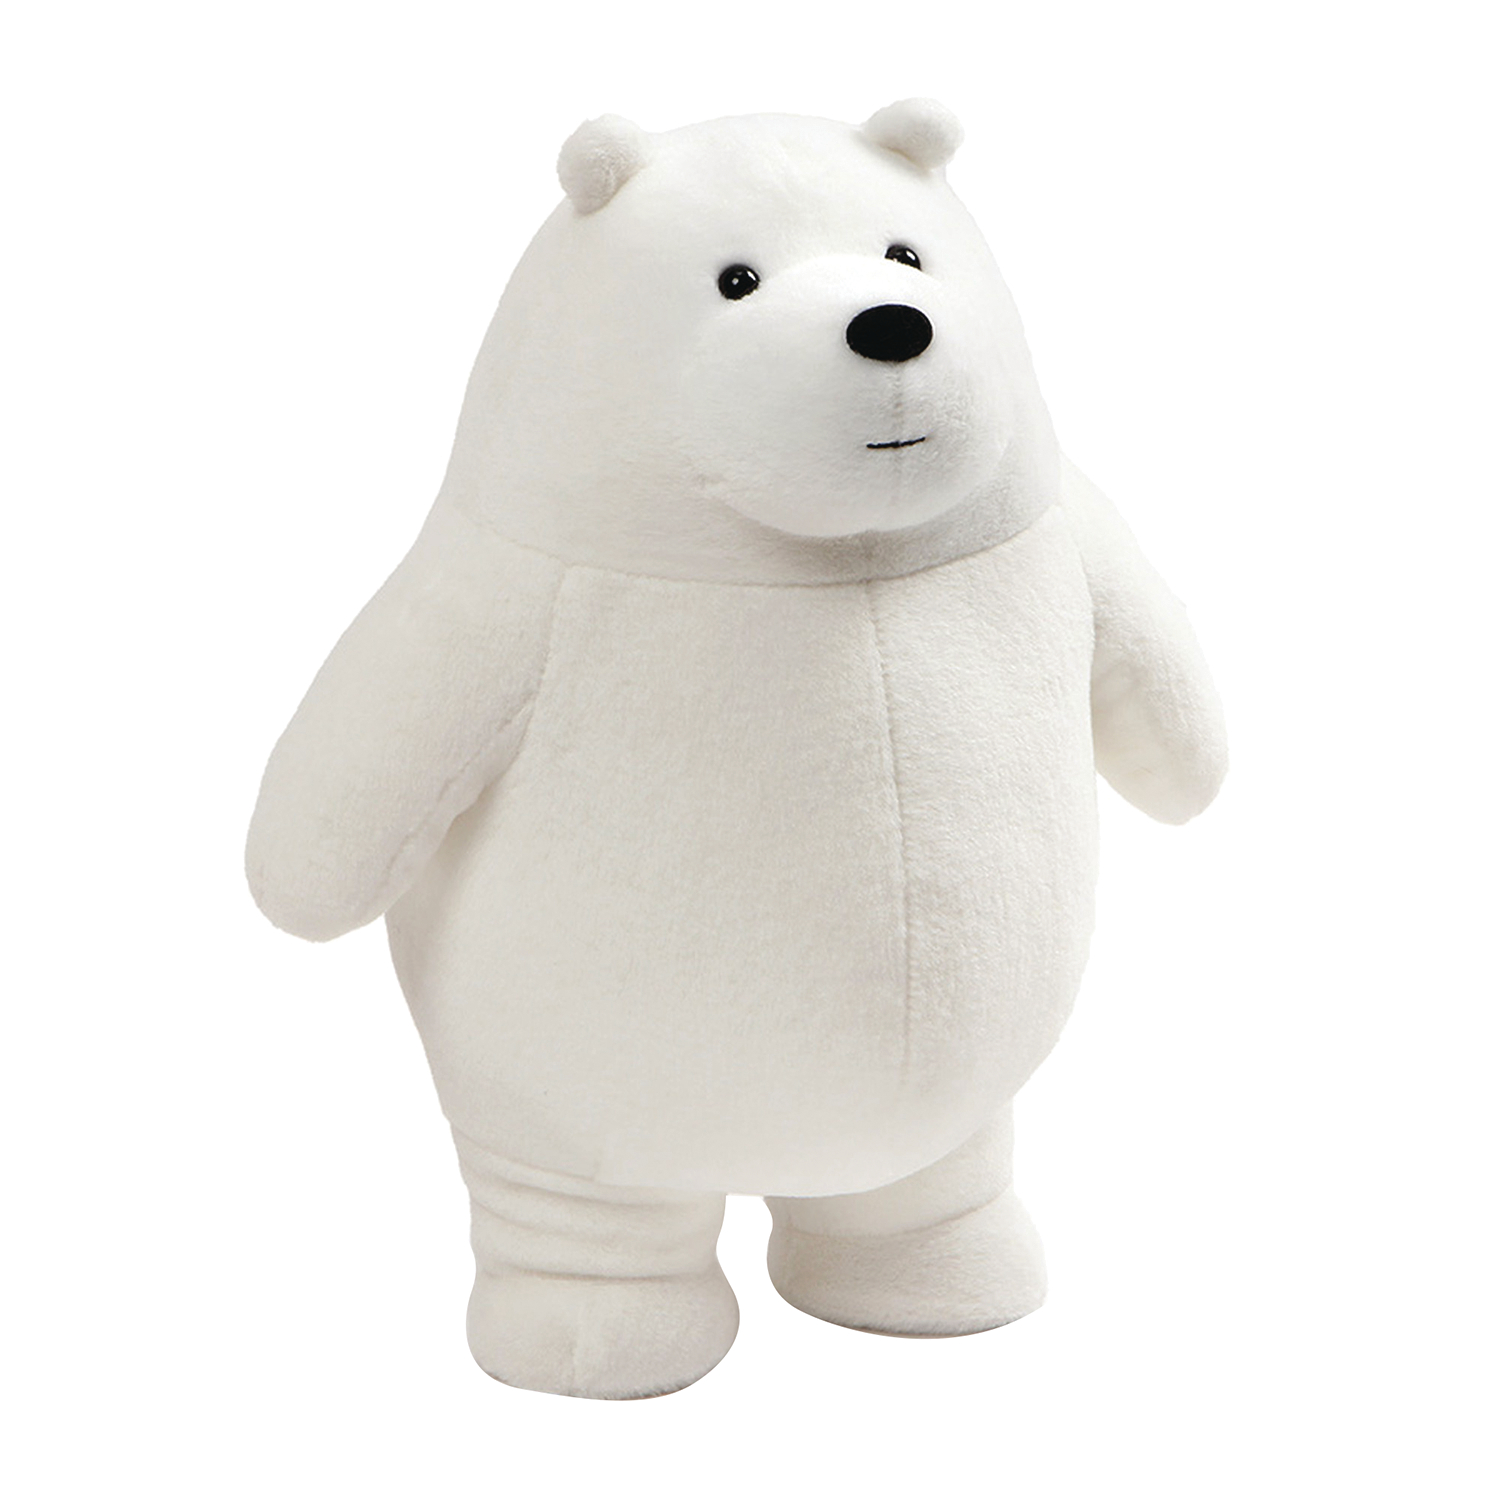 DEC178707 - WE BARE BEARS STANDING ICE BEAR 11IN PLUSH - Previews